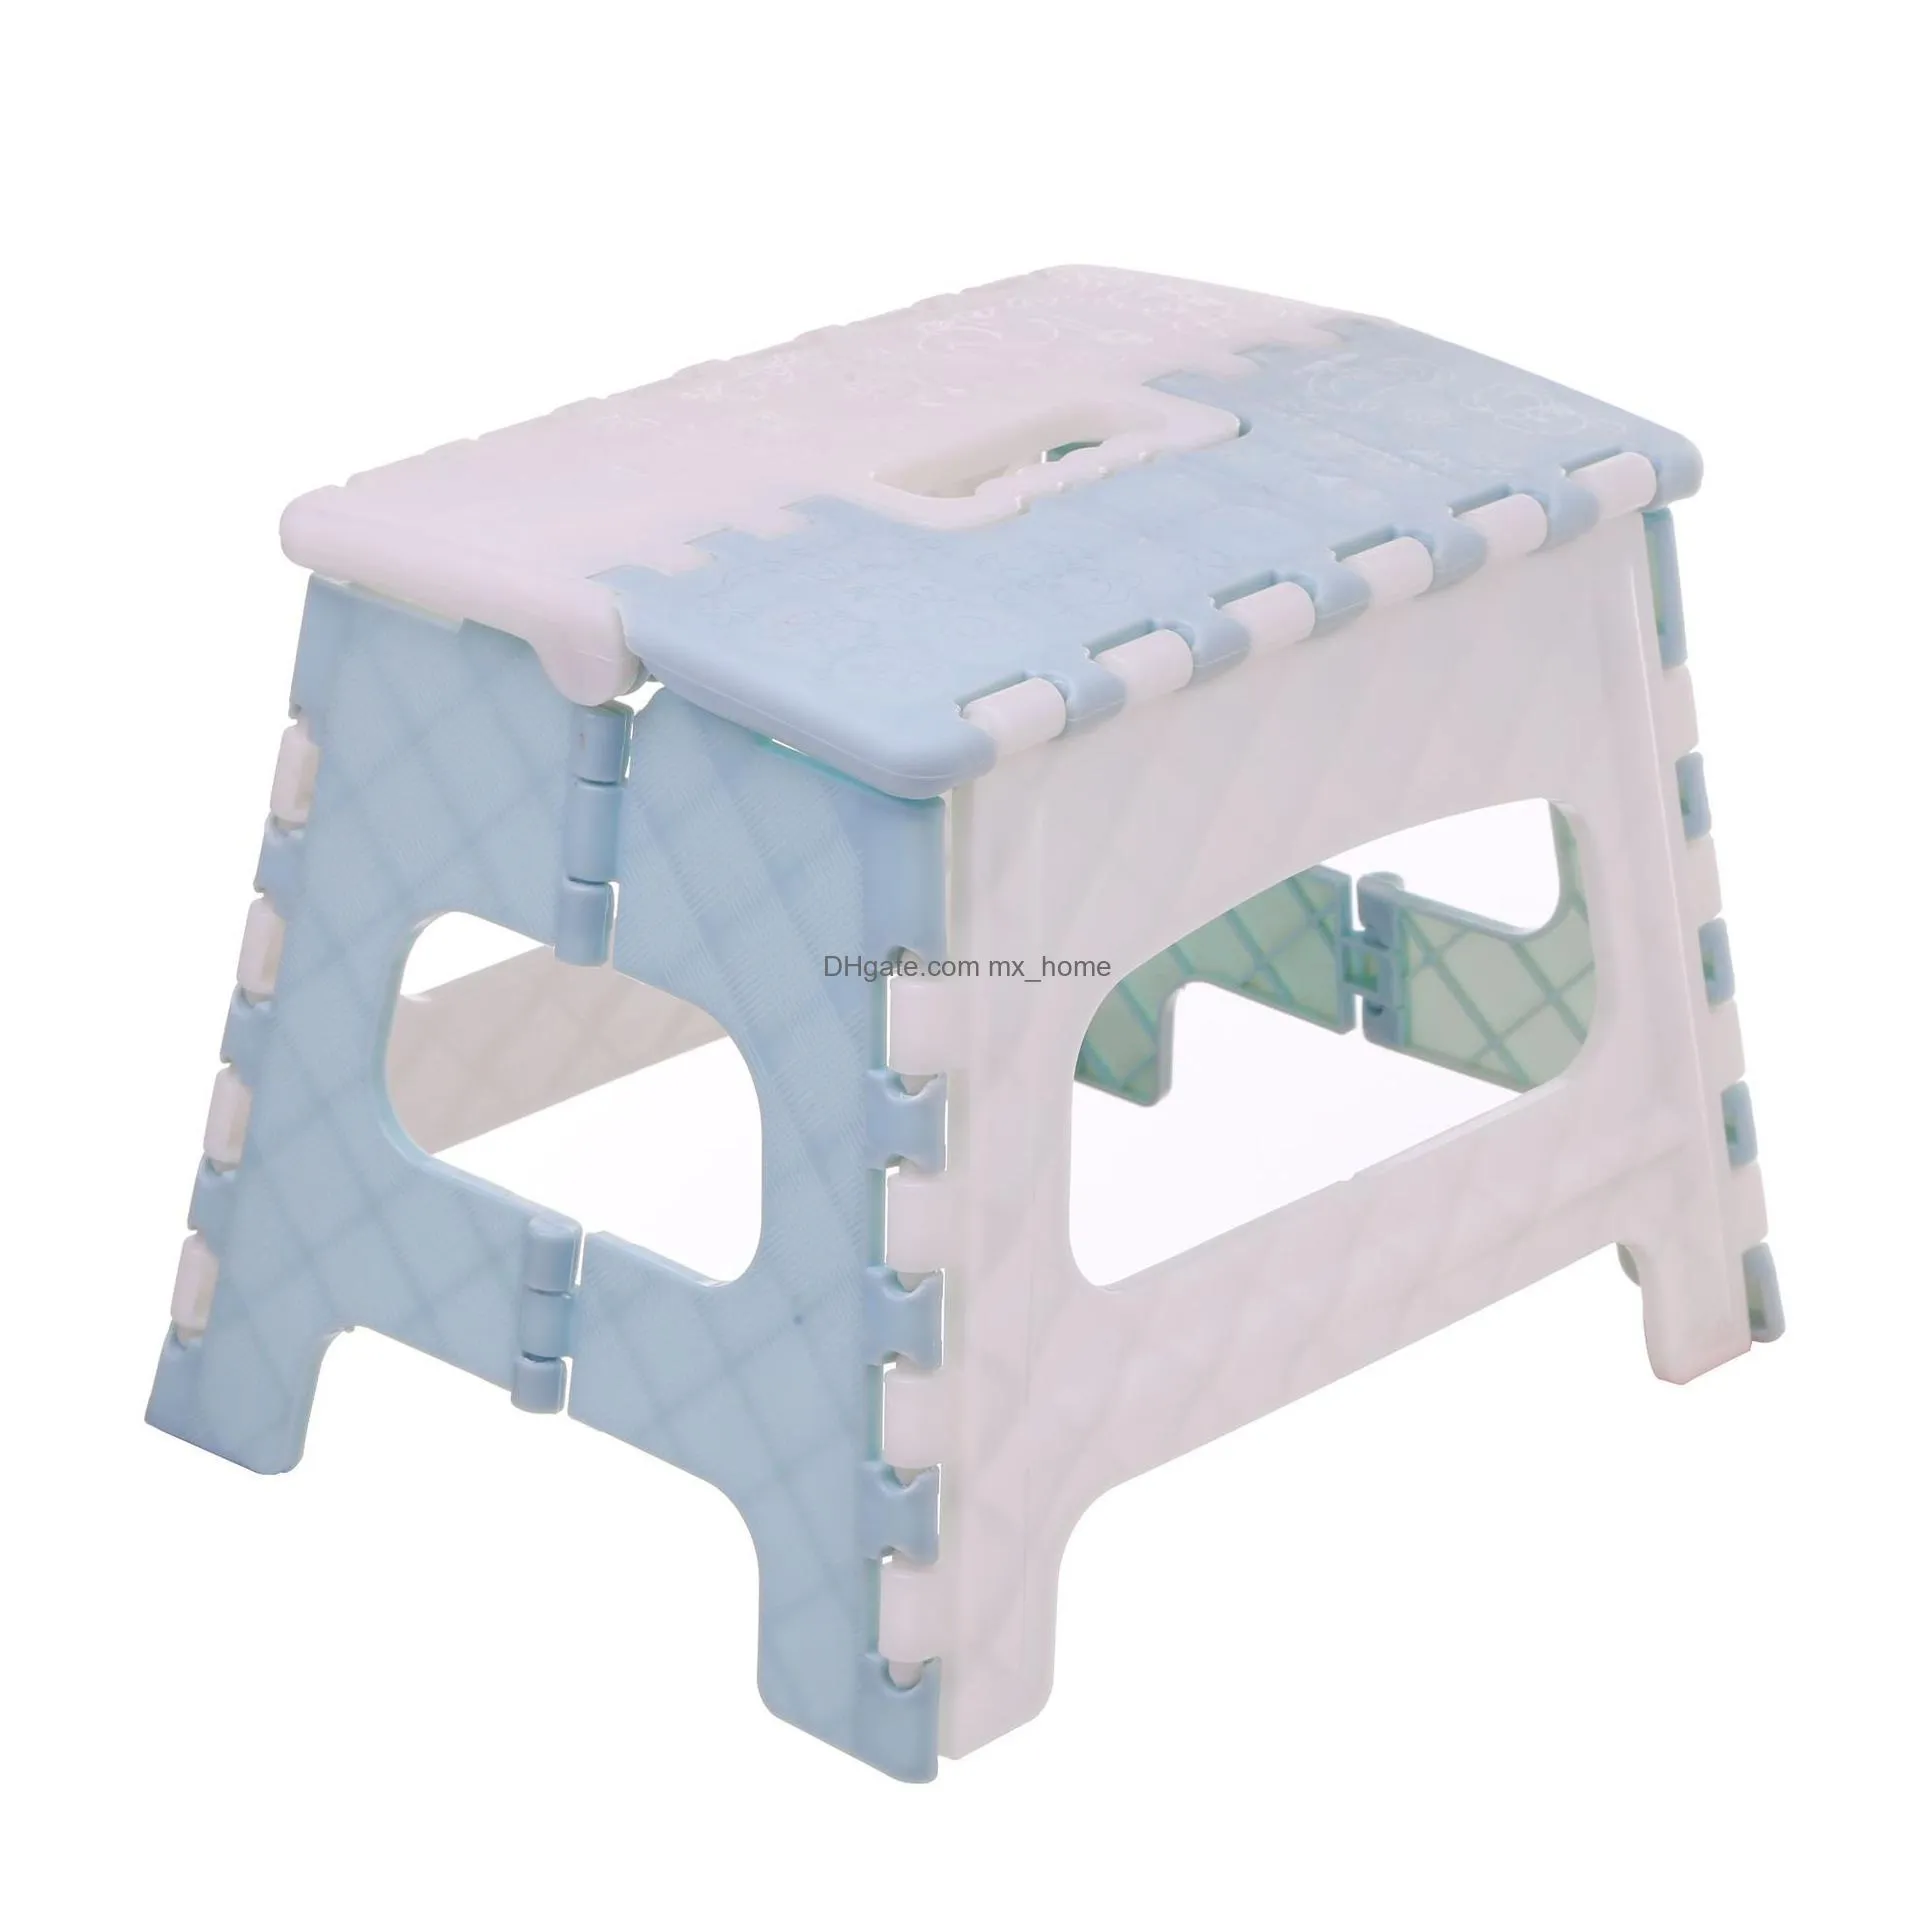 portable folding stools household chairs bathrooms kitchens gardens campsites children and adults